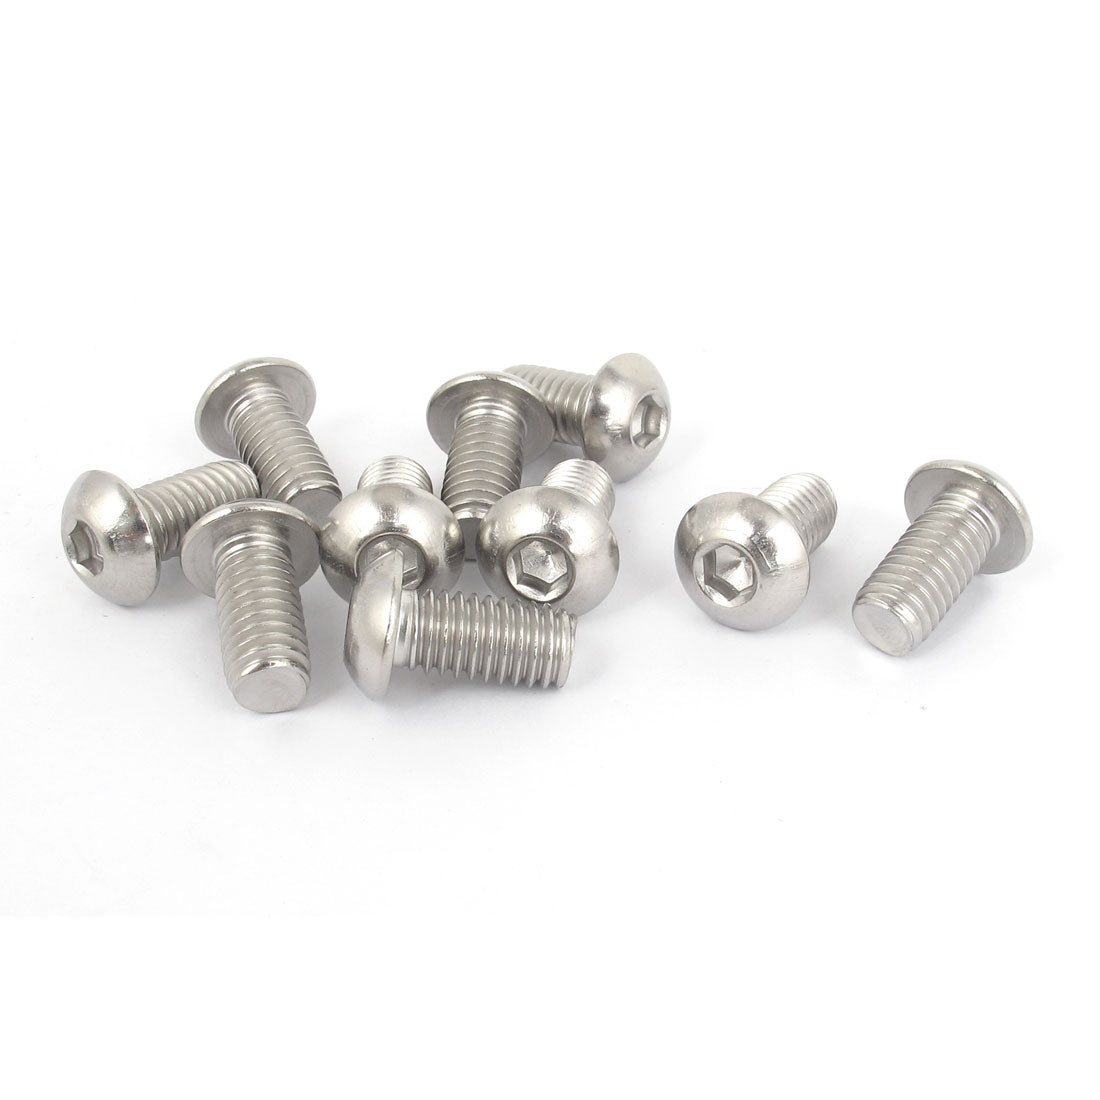 uxcell Uxcell 10pcs 3/8"-16x3/4" Stainless Steel Hex Socket Button Head Bolts Screws